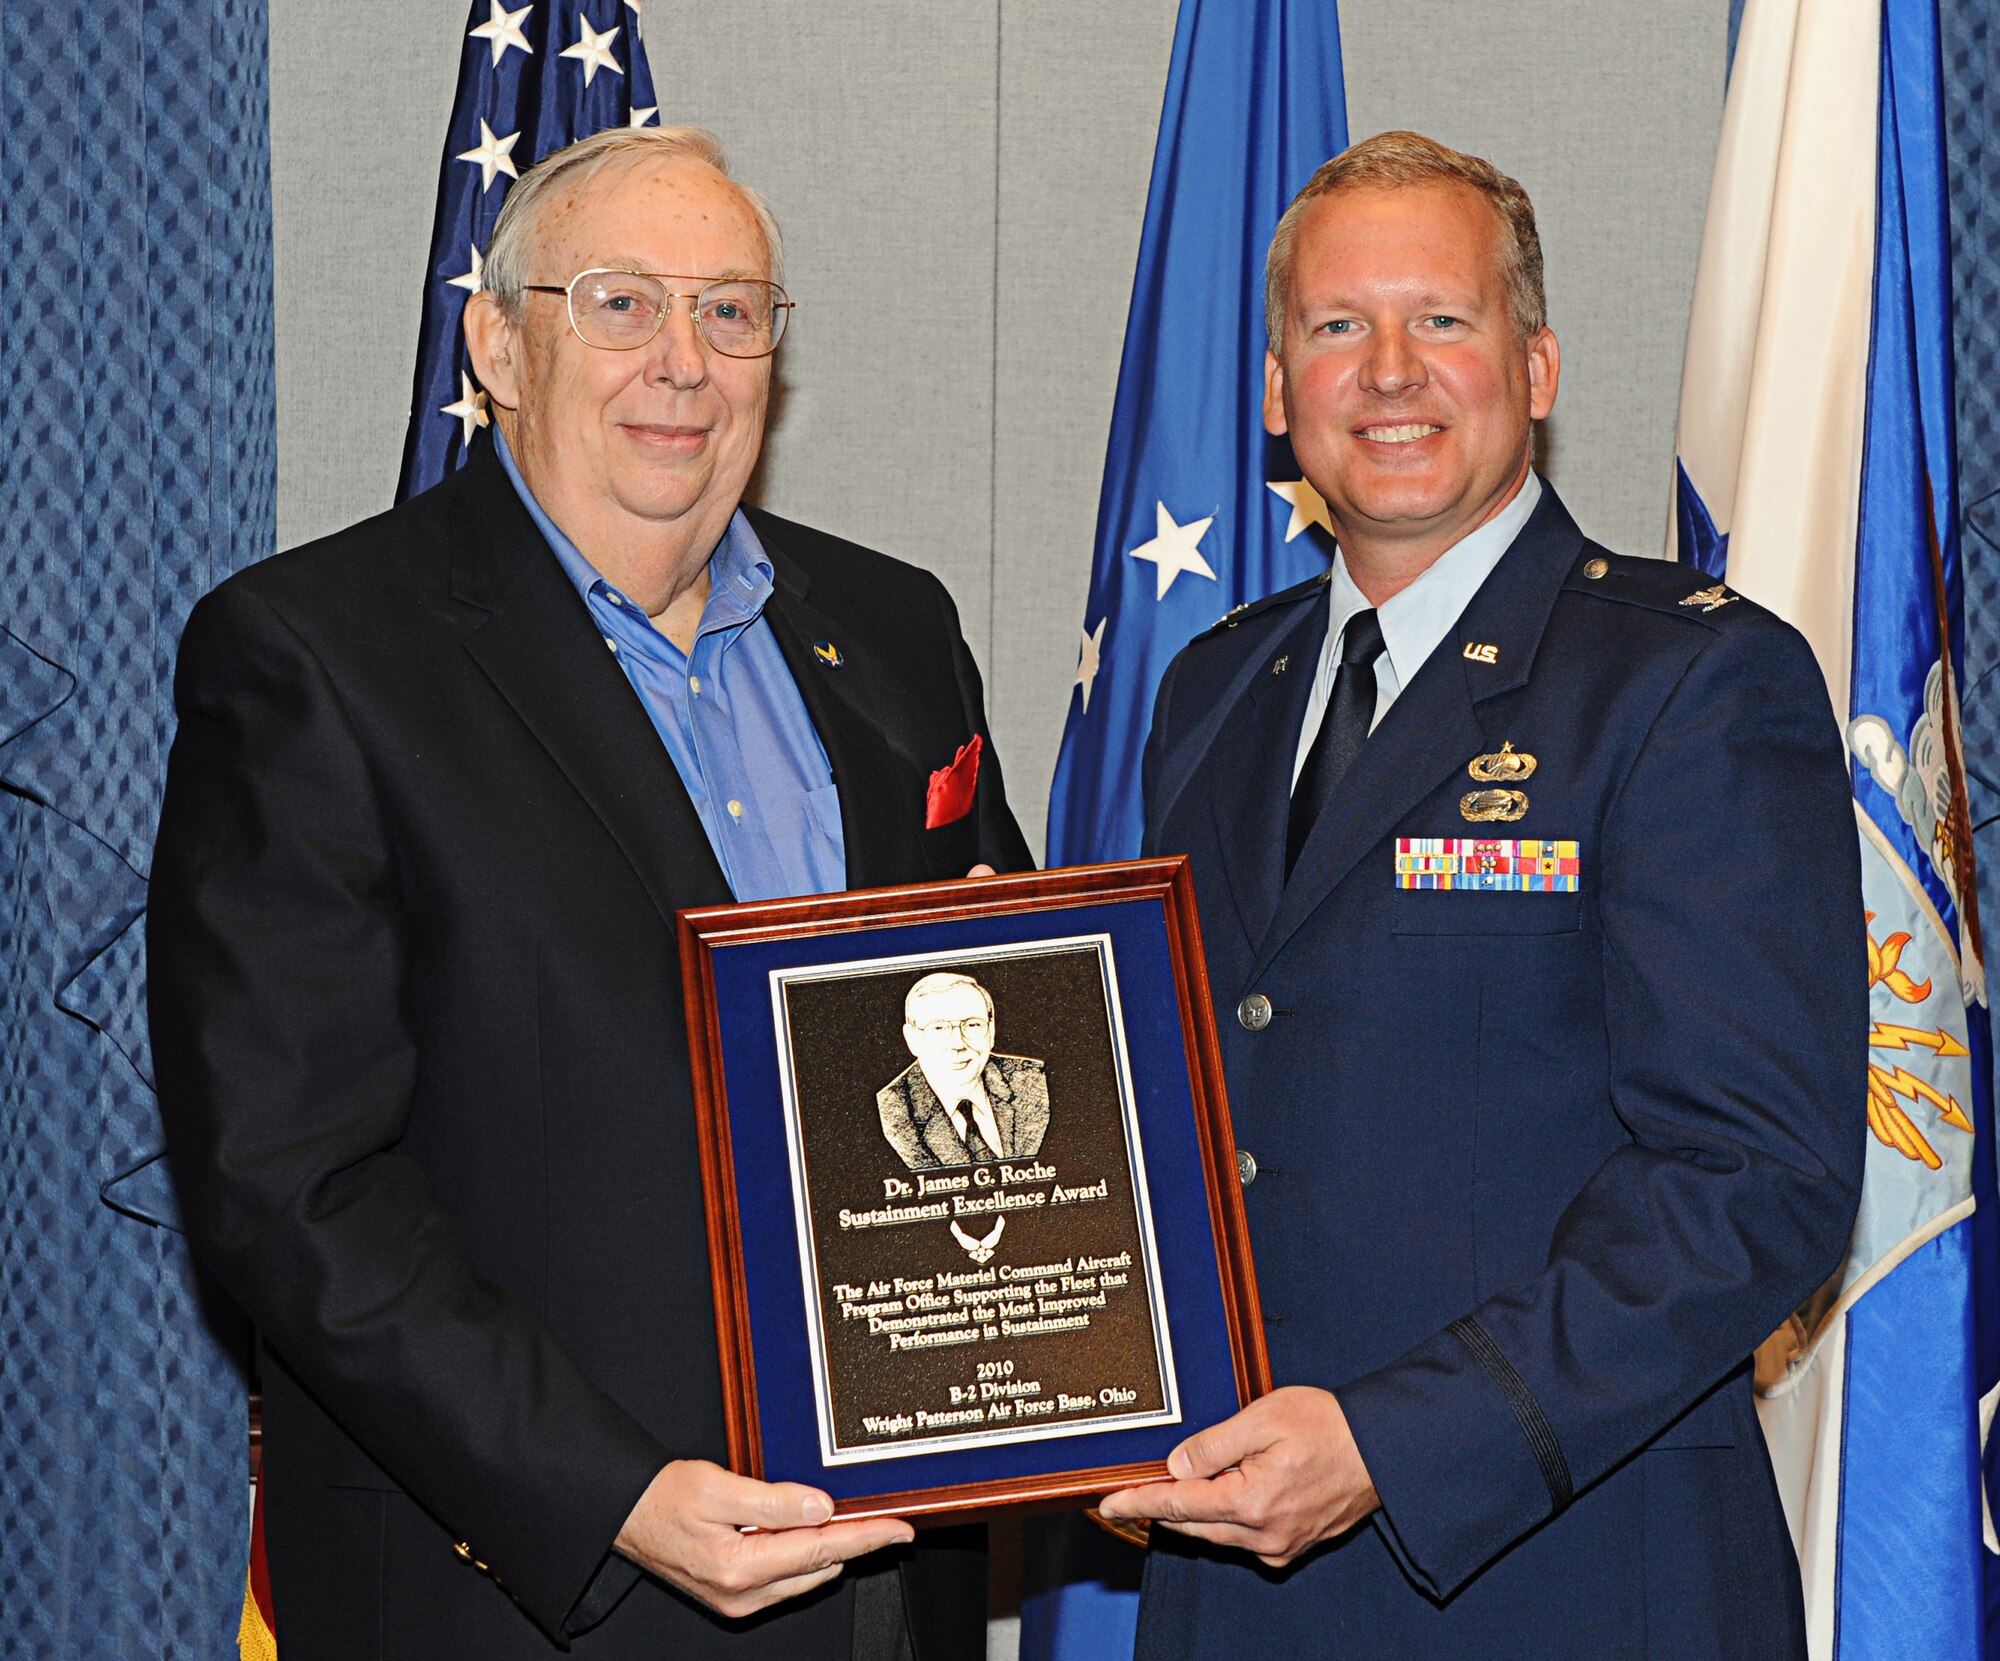 Dr. James G. Roche, former Secretary of the Air Force, poses for a photograph with Col. Mark Williams, Chief of the B-2 Division at Wright-Patterson Air Force Base, Ohio, during an award ceremony in the Pentagon April 11, 2011. Colonel Williams represented all the members of the B-2 Spirit division, which won the 2010 Dr. James G. Roche Sustainment Excellence Award for demonstrating the most improved performance in aircraft maintenance and logistics readiness. (U.S. Air Force photo/Andy Morataya)
